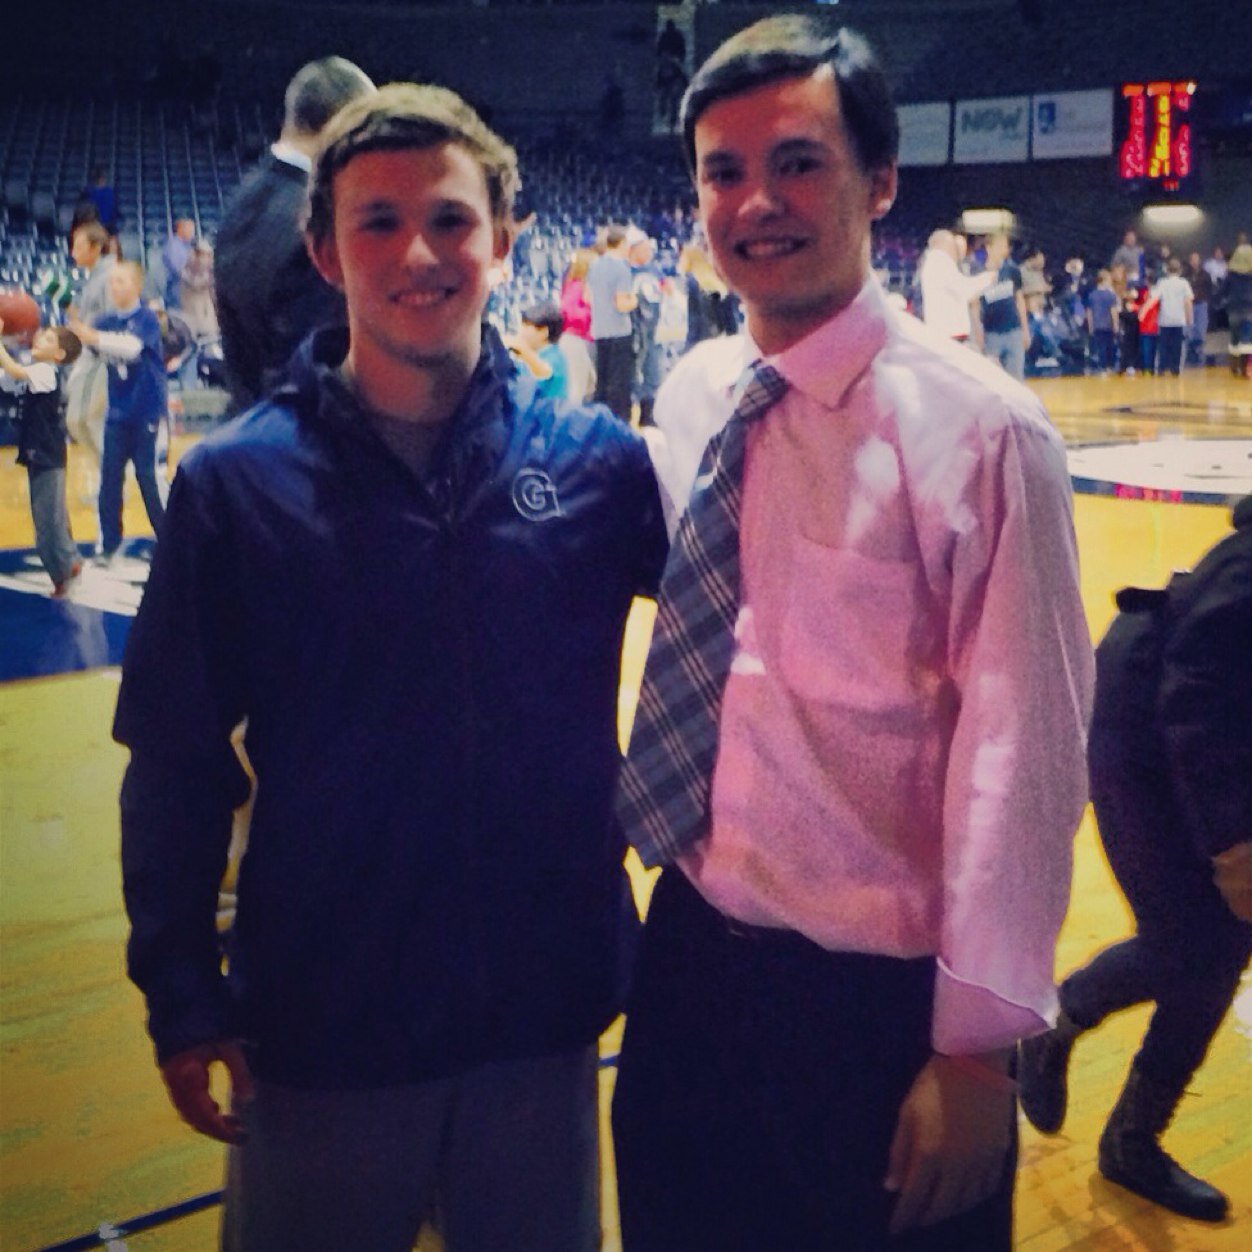 Manager for Georgetown Men's Basketball